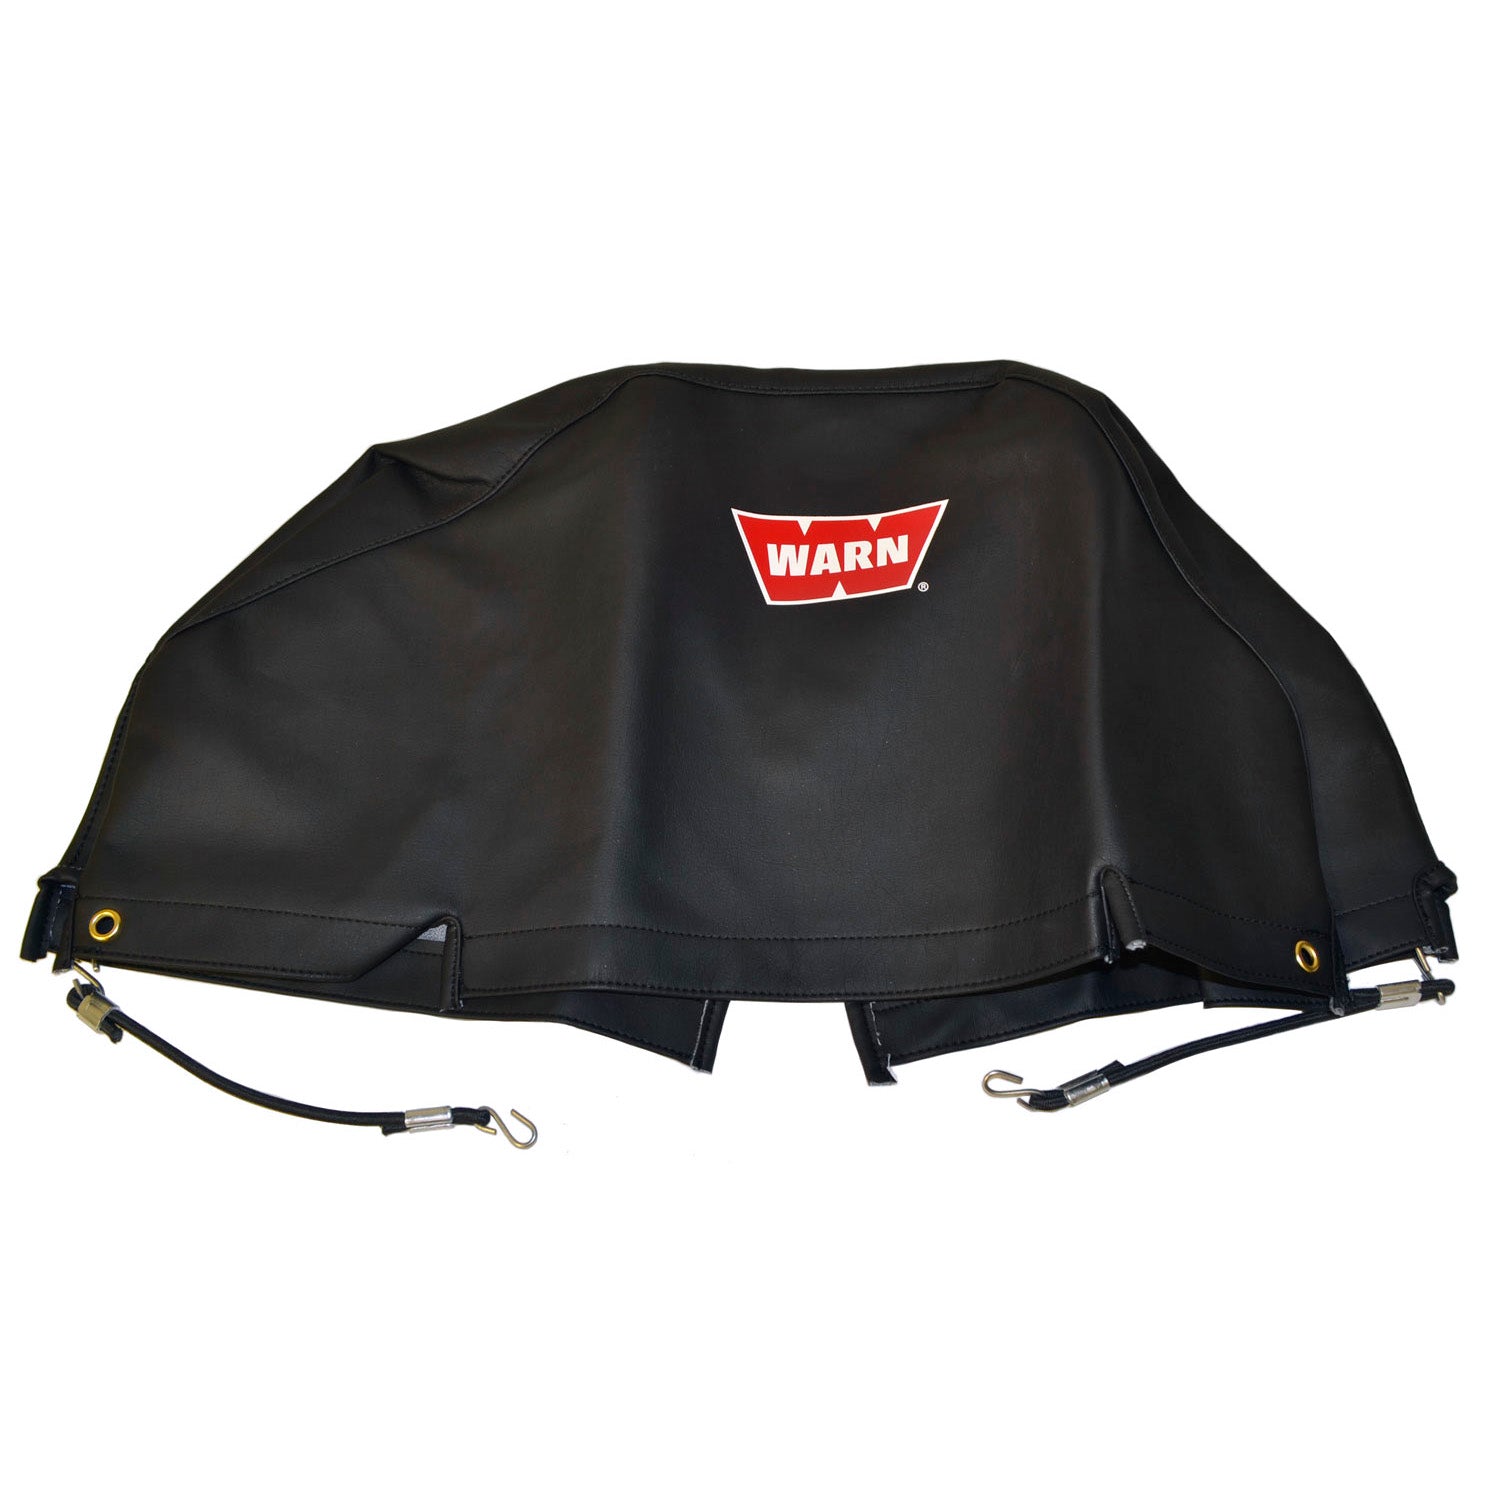 Winch Cover Fits 9.5XP, XD9000, M8000, VR8000, VR10000, VR12000 and M6000 (with control pack mounted behind winch motor)